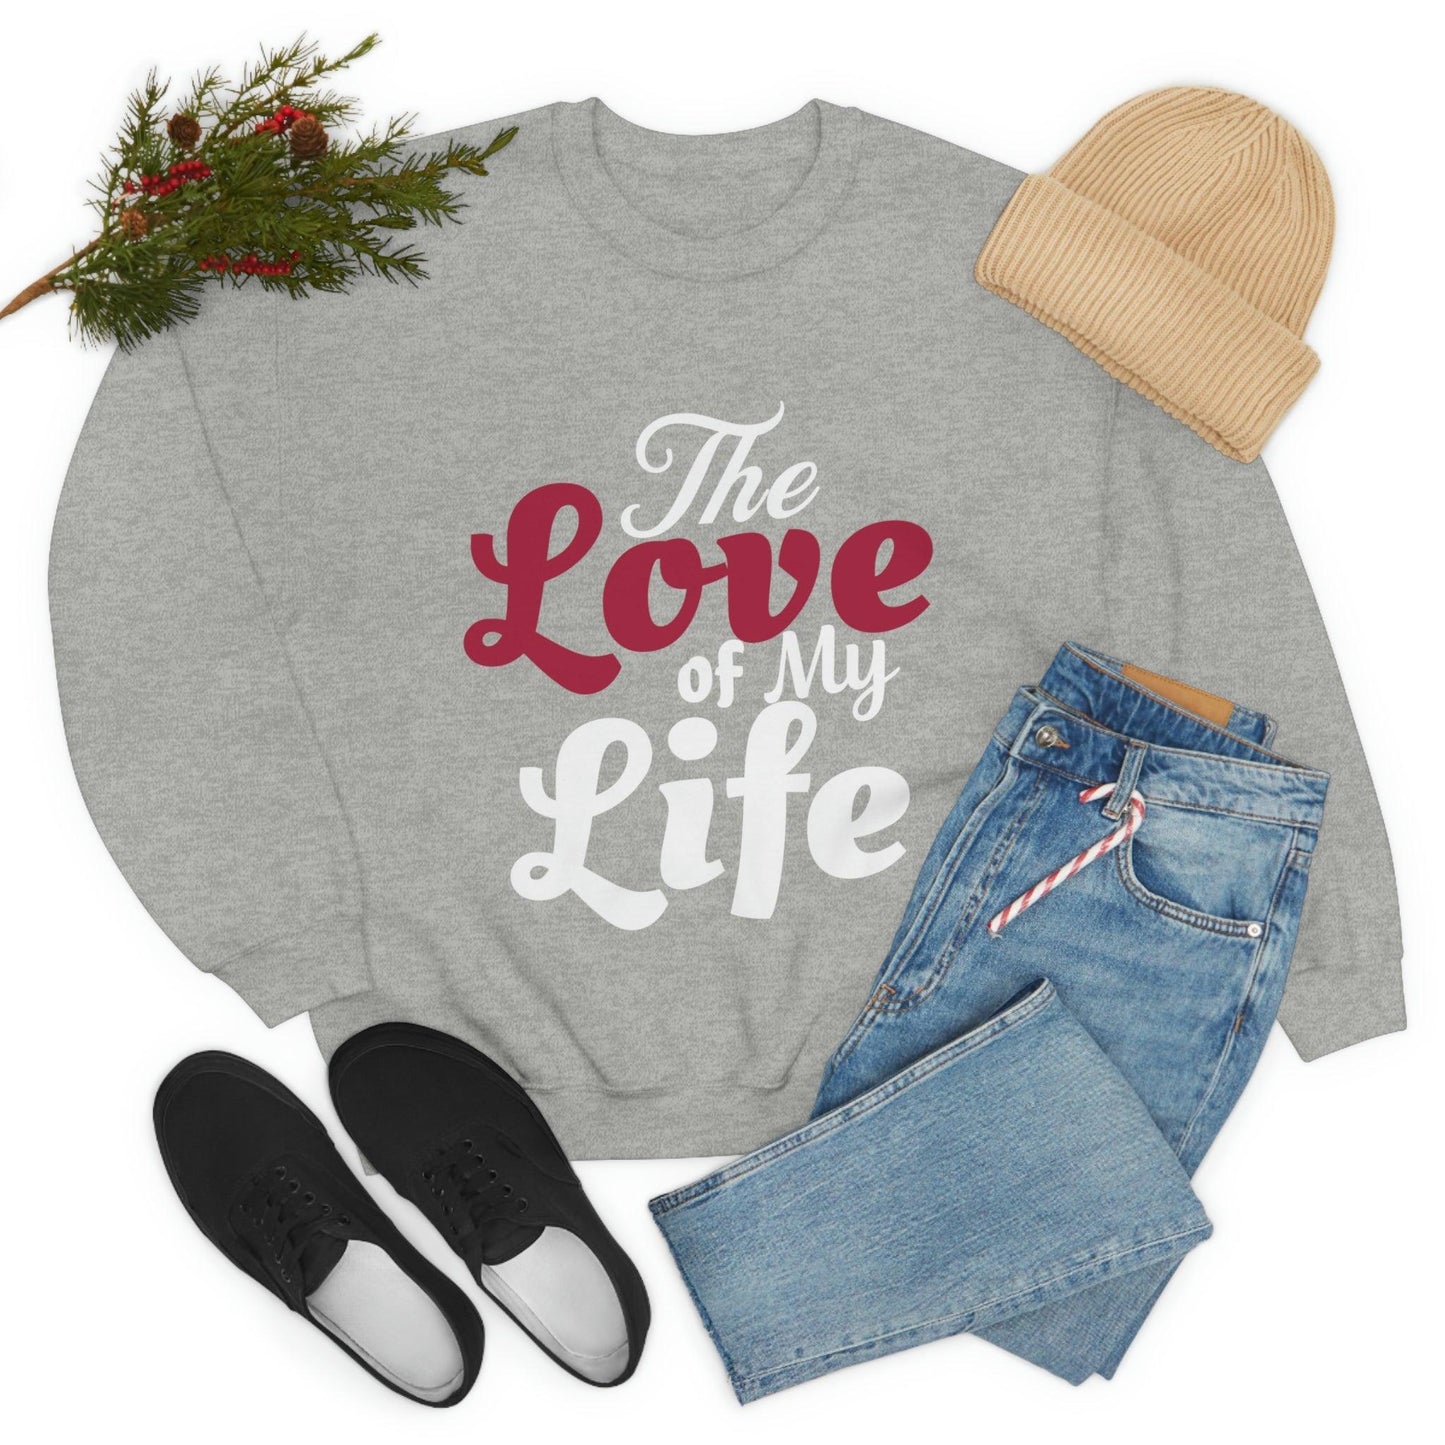 Love Sweatshirt, Love Shirt, Gift For Fiance, Newlywed Gift, Gift For Wife, Engagement Shirt,The Love of My Life, Valentine's day gift